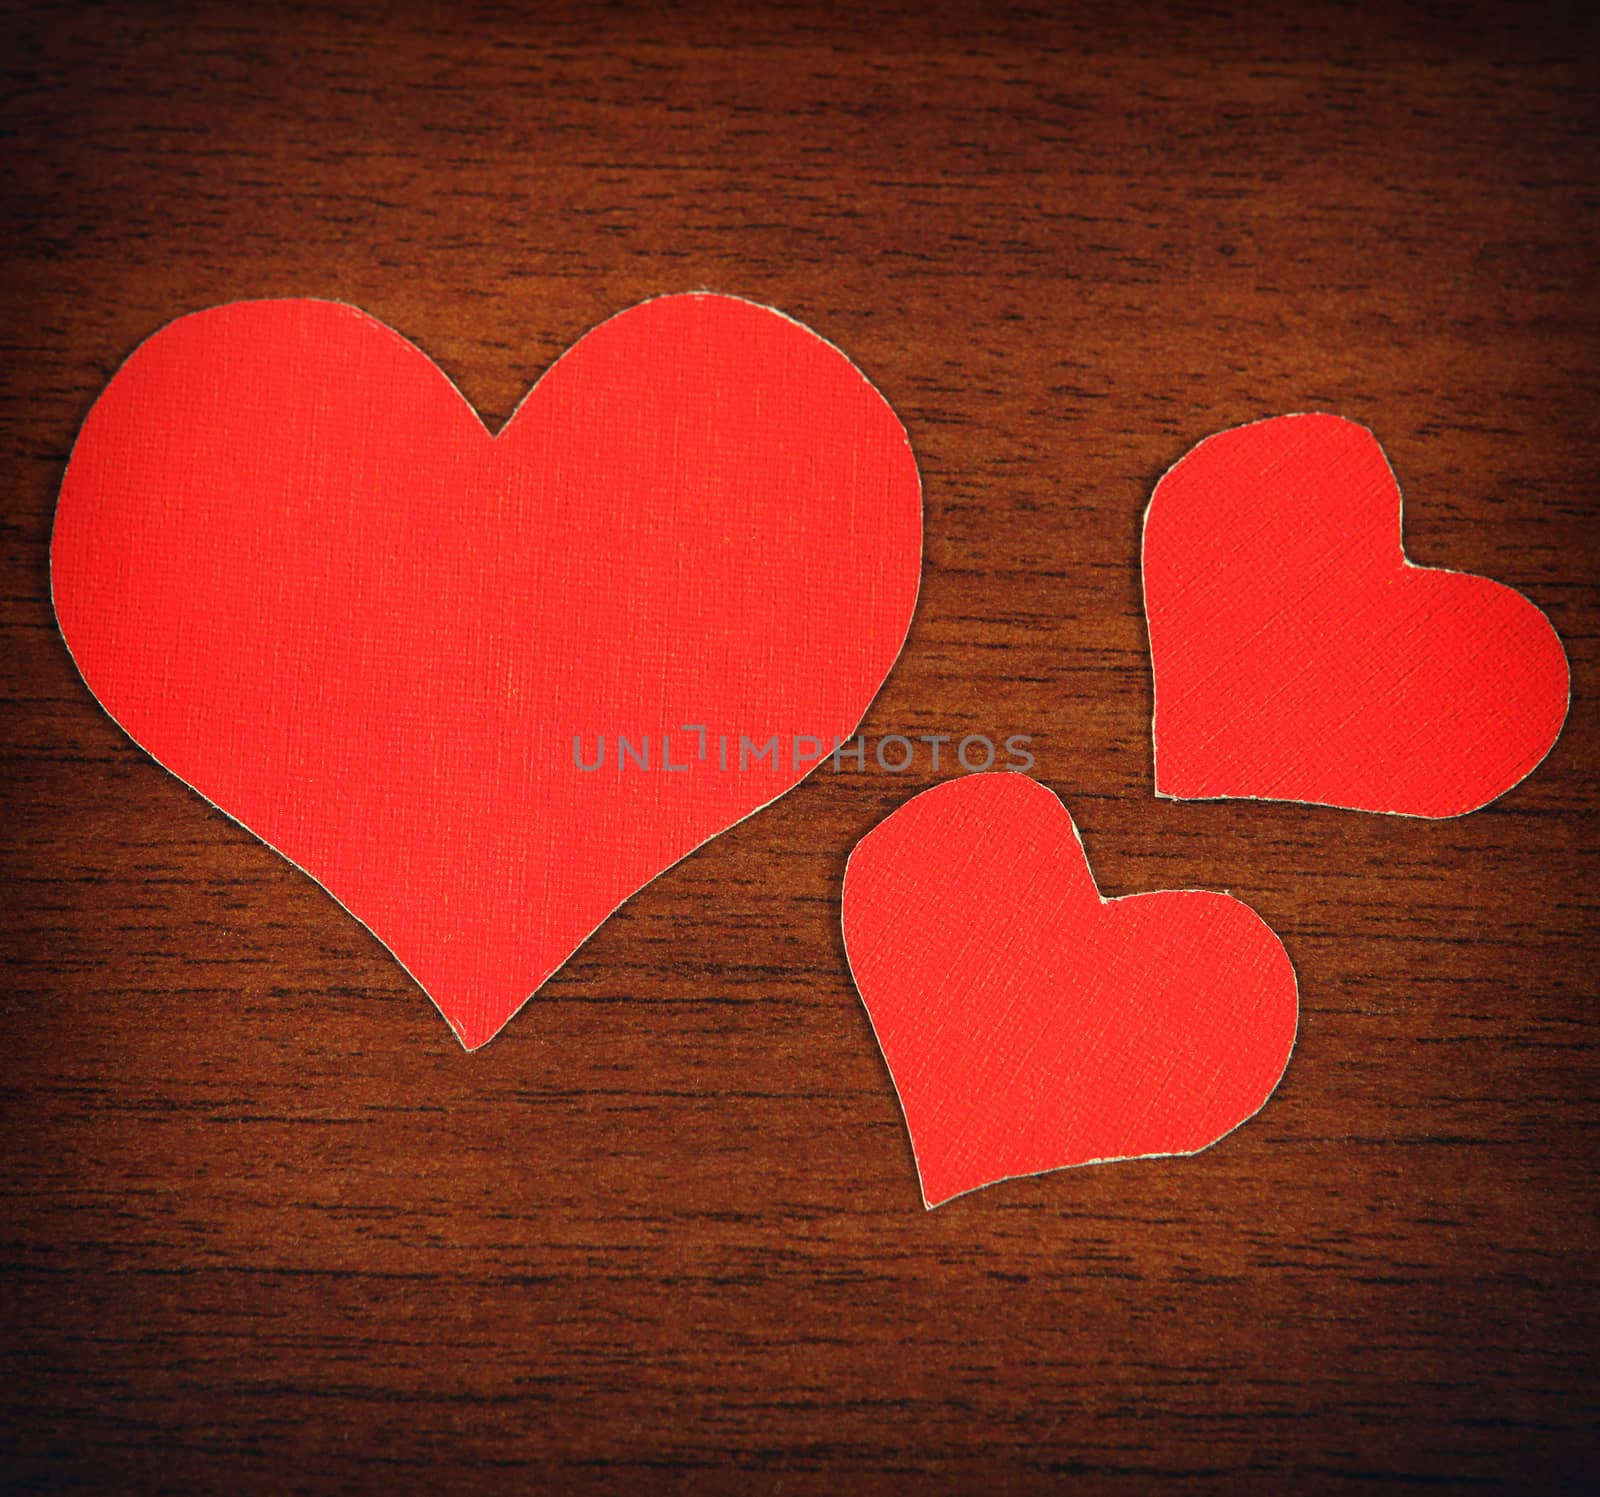 Heart Shapes on the Wooden Background